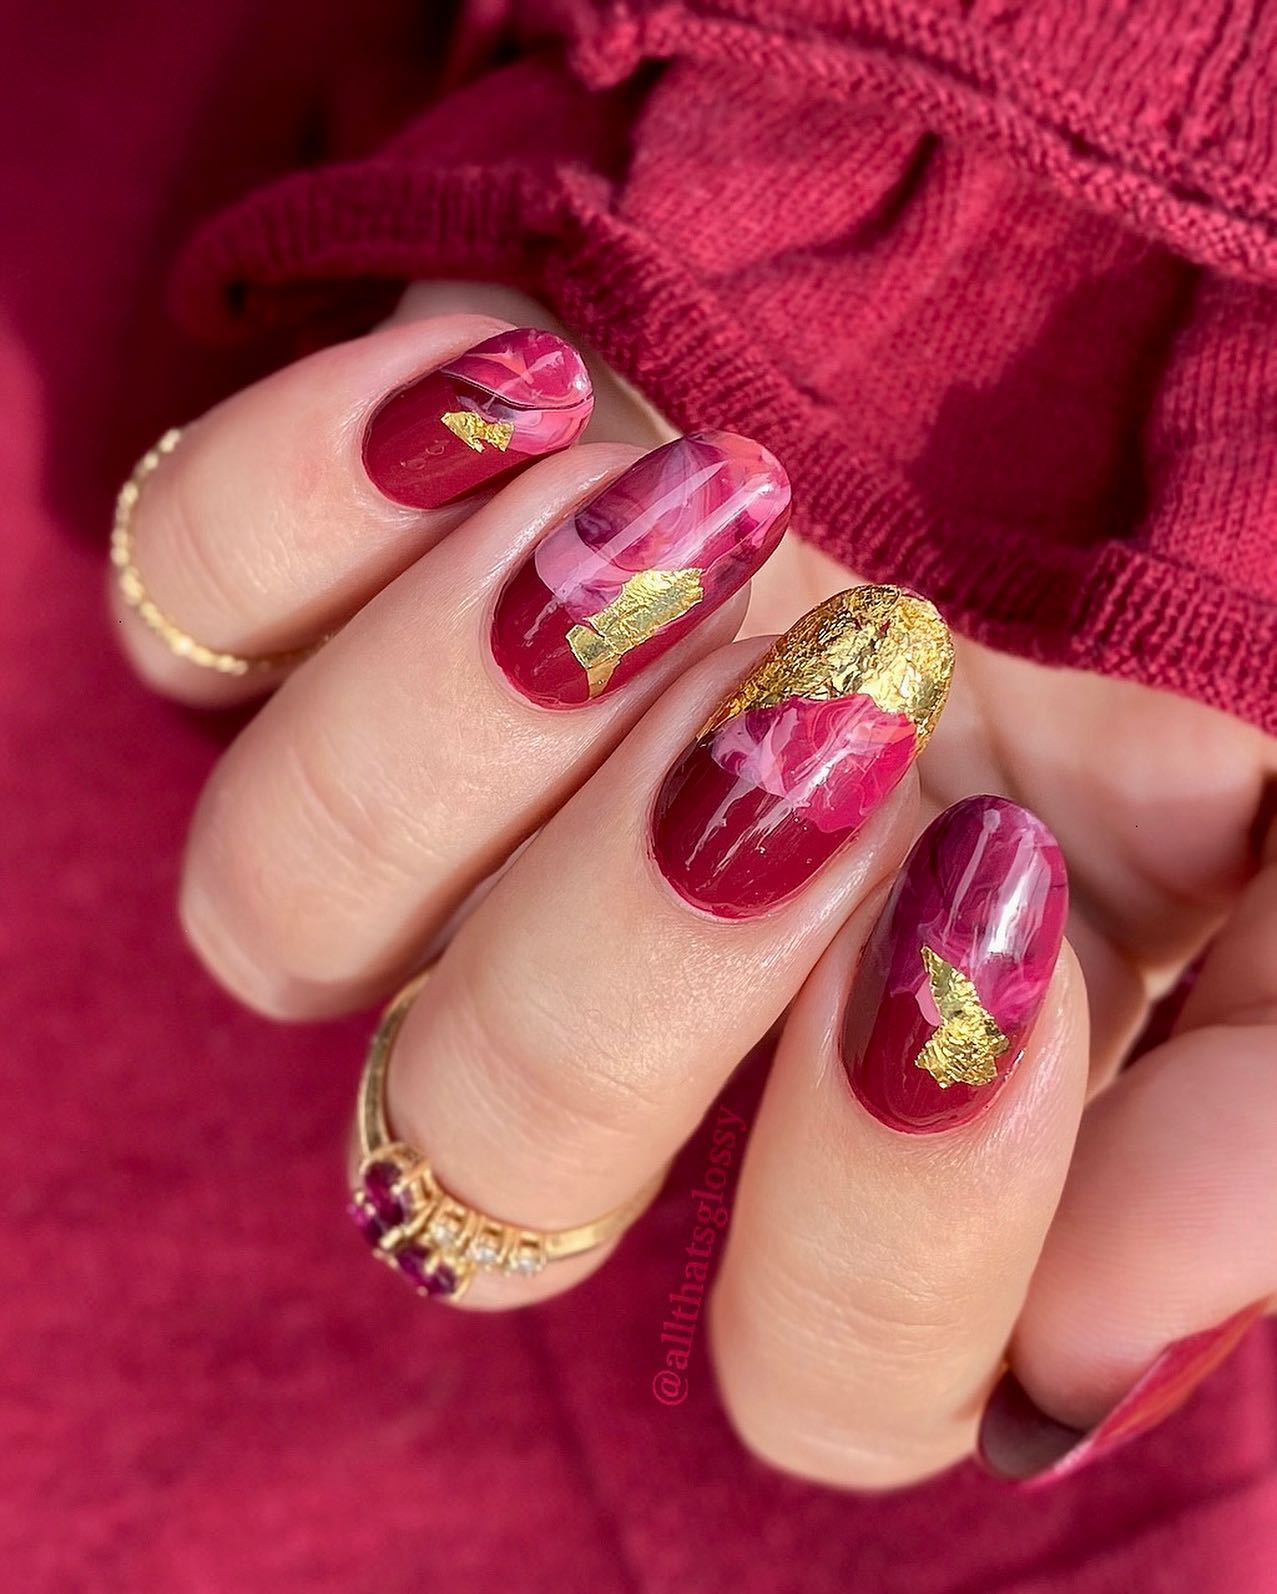 Round Light Burgundy Nails with Gold Foil and Marble Design